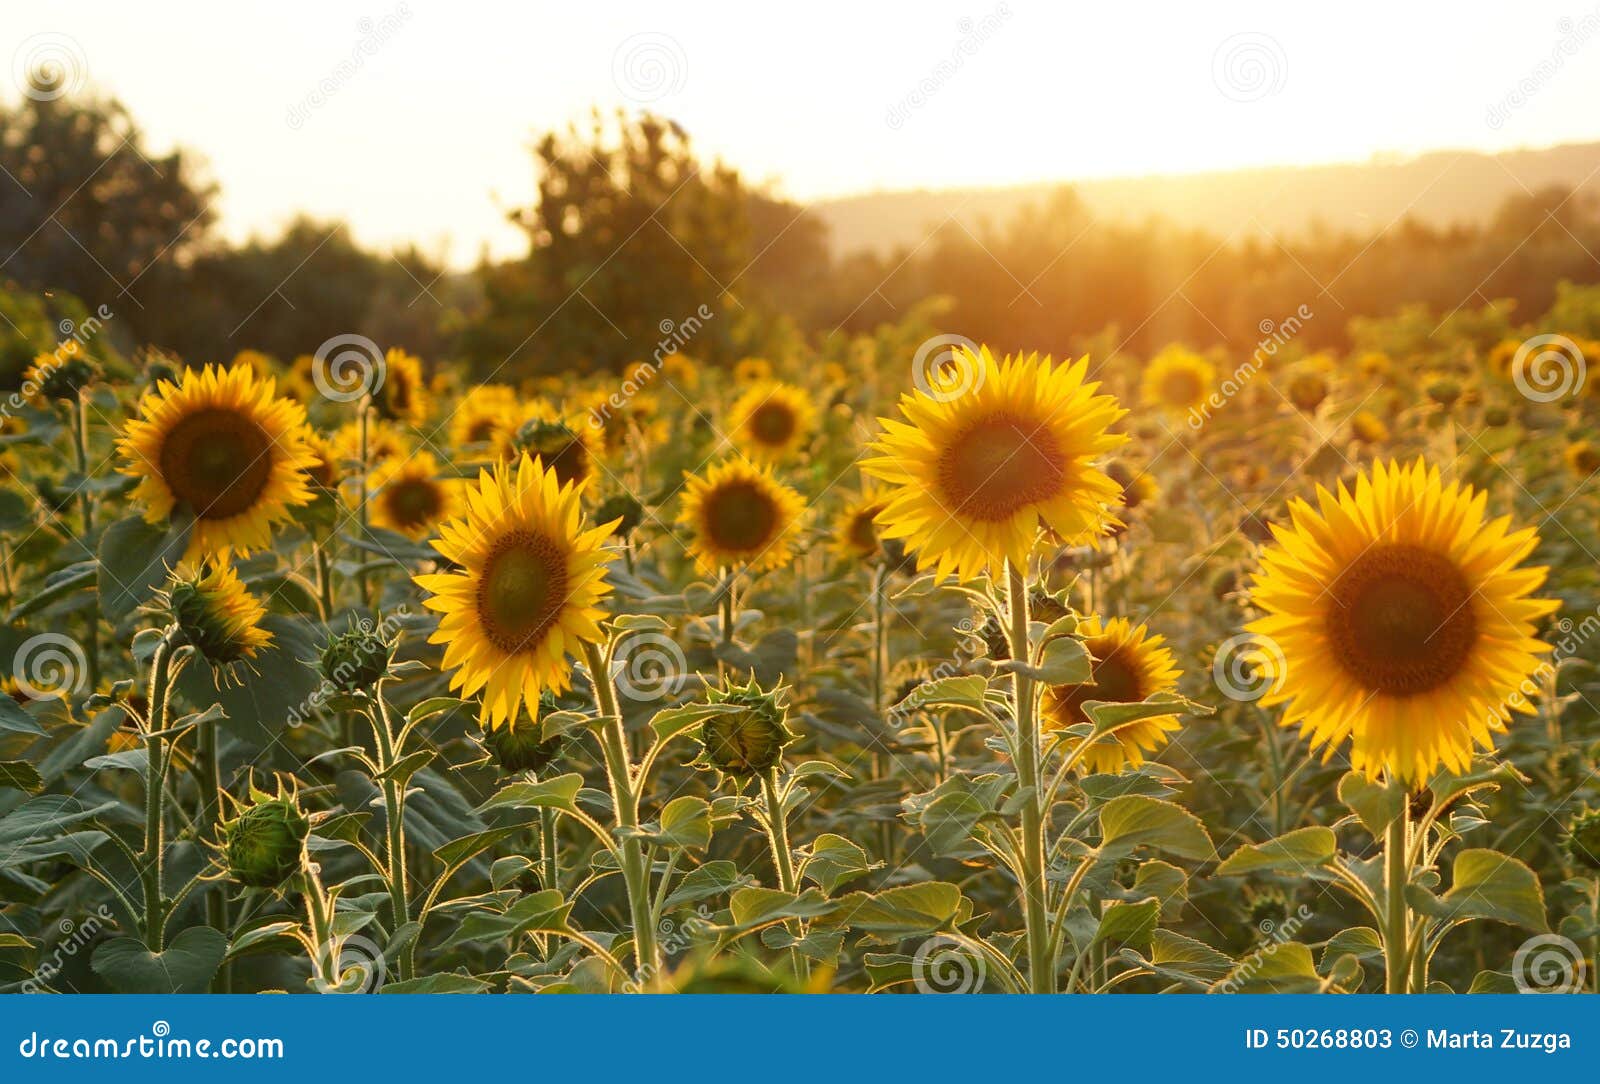 field of sunflowers in tuscany.